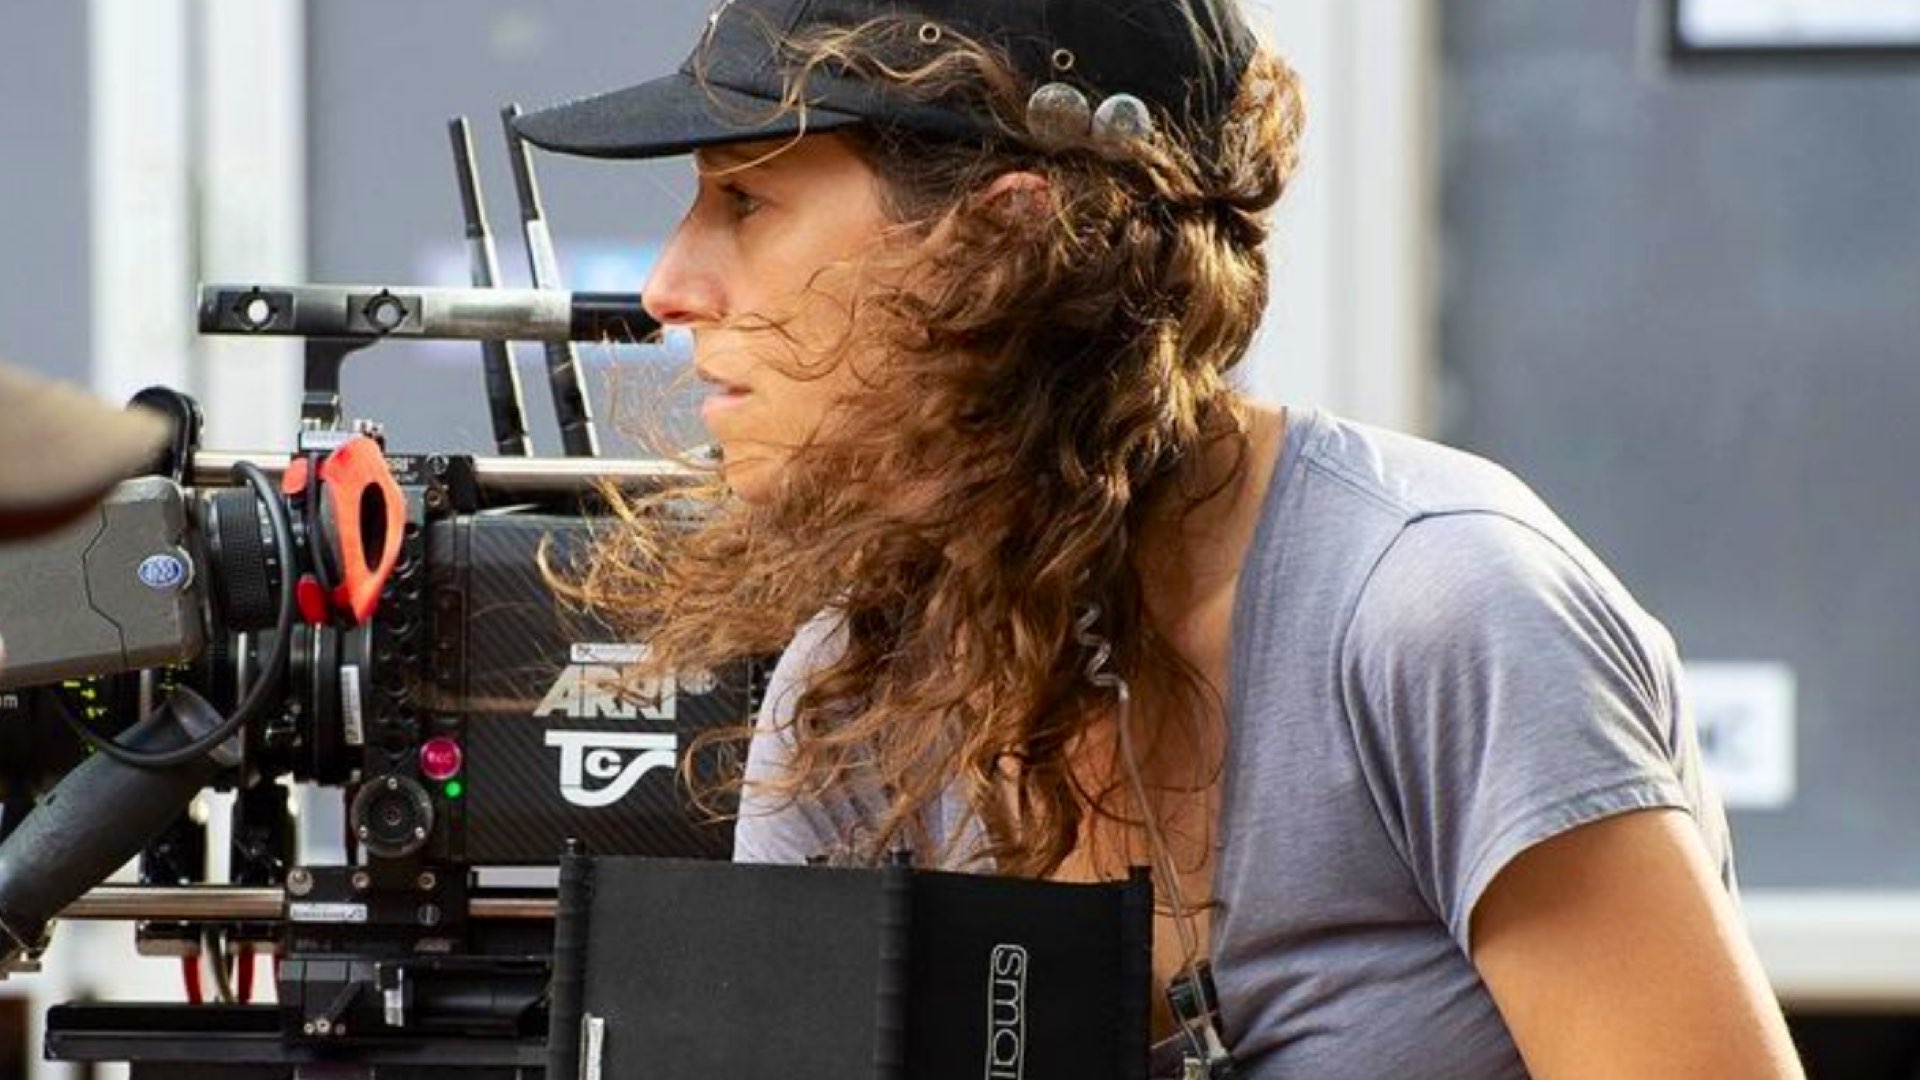 ‘Infamous’ Cinematography: Super 35mm and Extreme Closeups Crafted by DP Eve Cohen. Picture: Eve Cohen Instagram